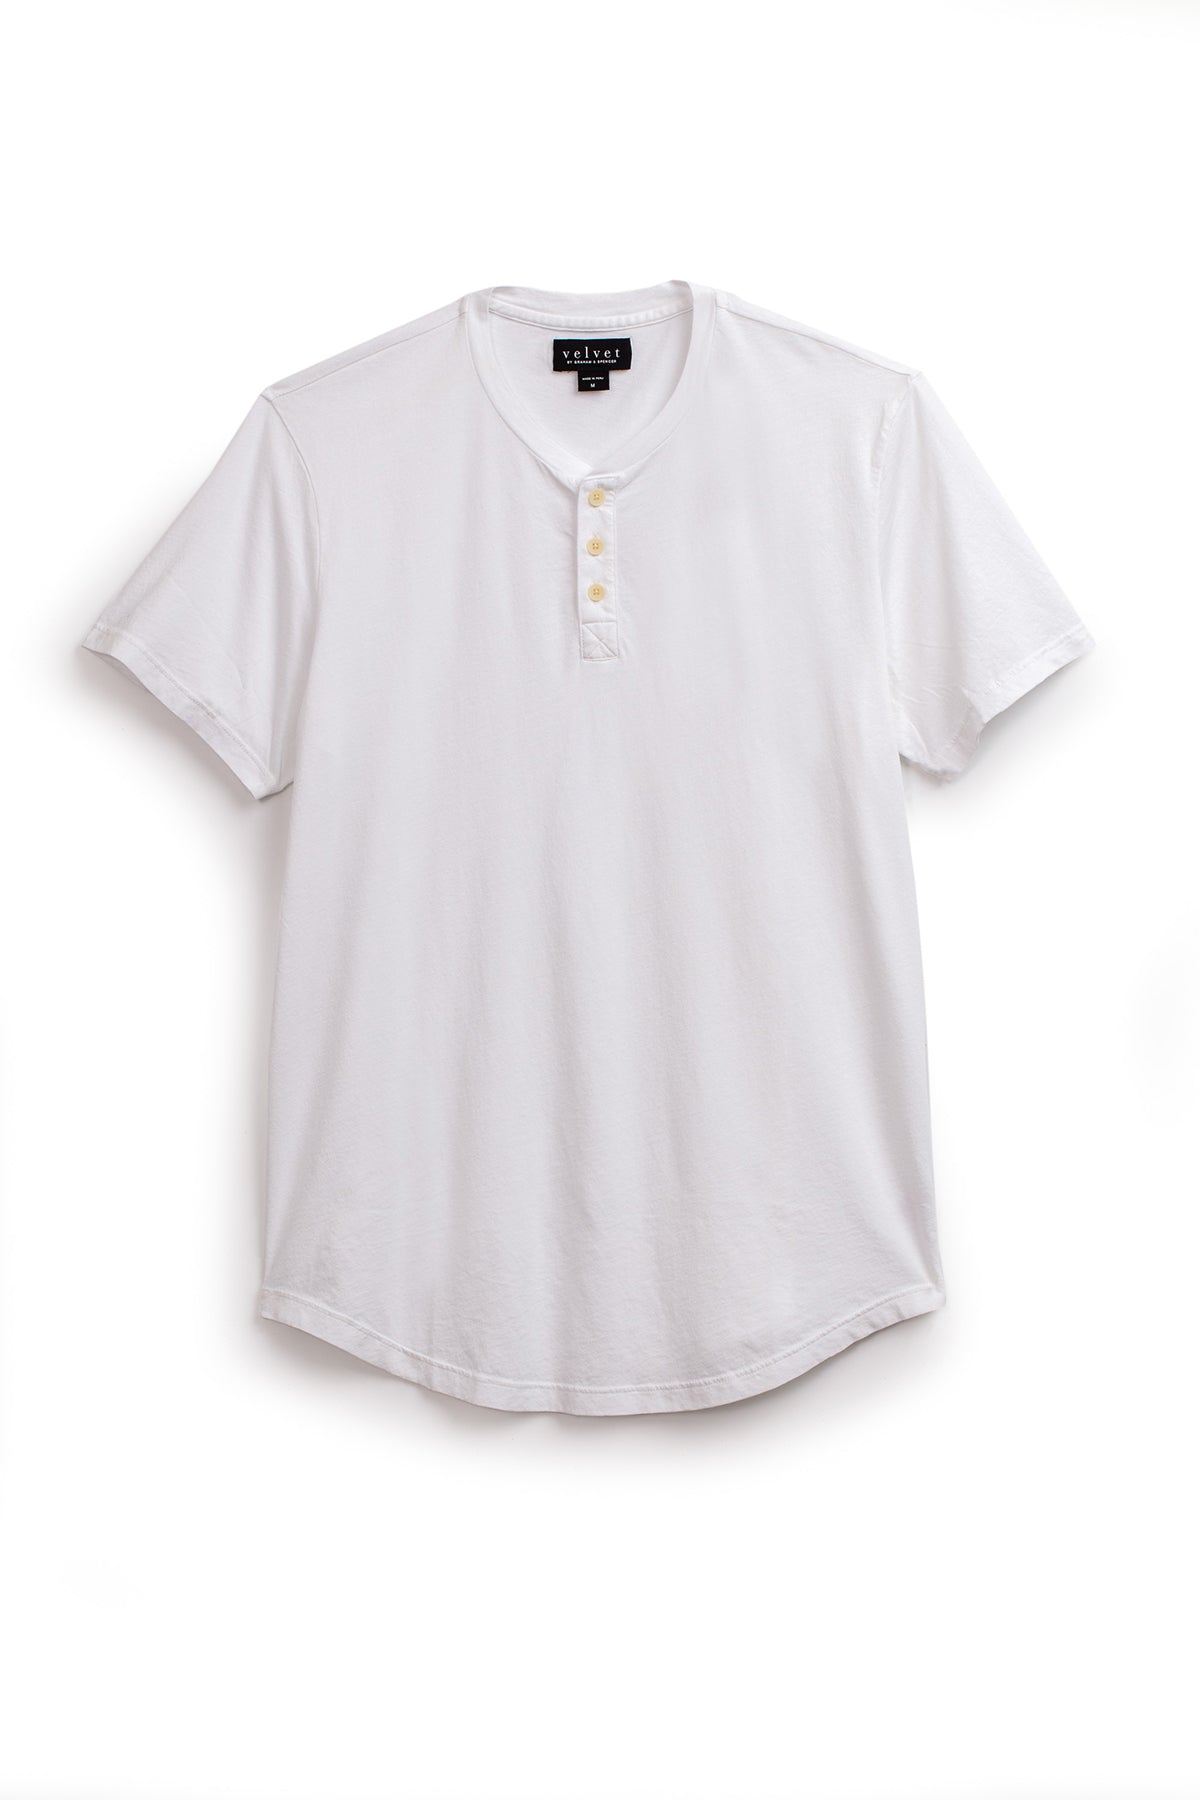 White FULTON HENLEY tee with short sleeves and a three-button placket, crafted from lightweight cotton jersey, displayed flat on a white background.-20811070374081